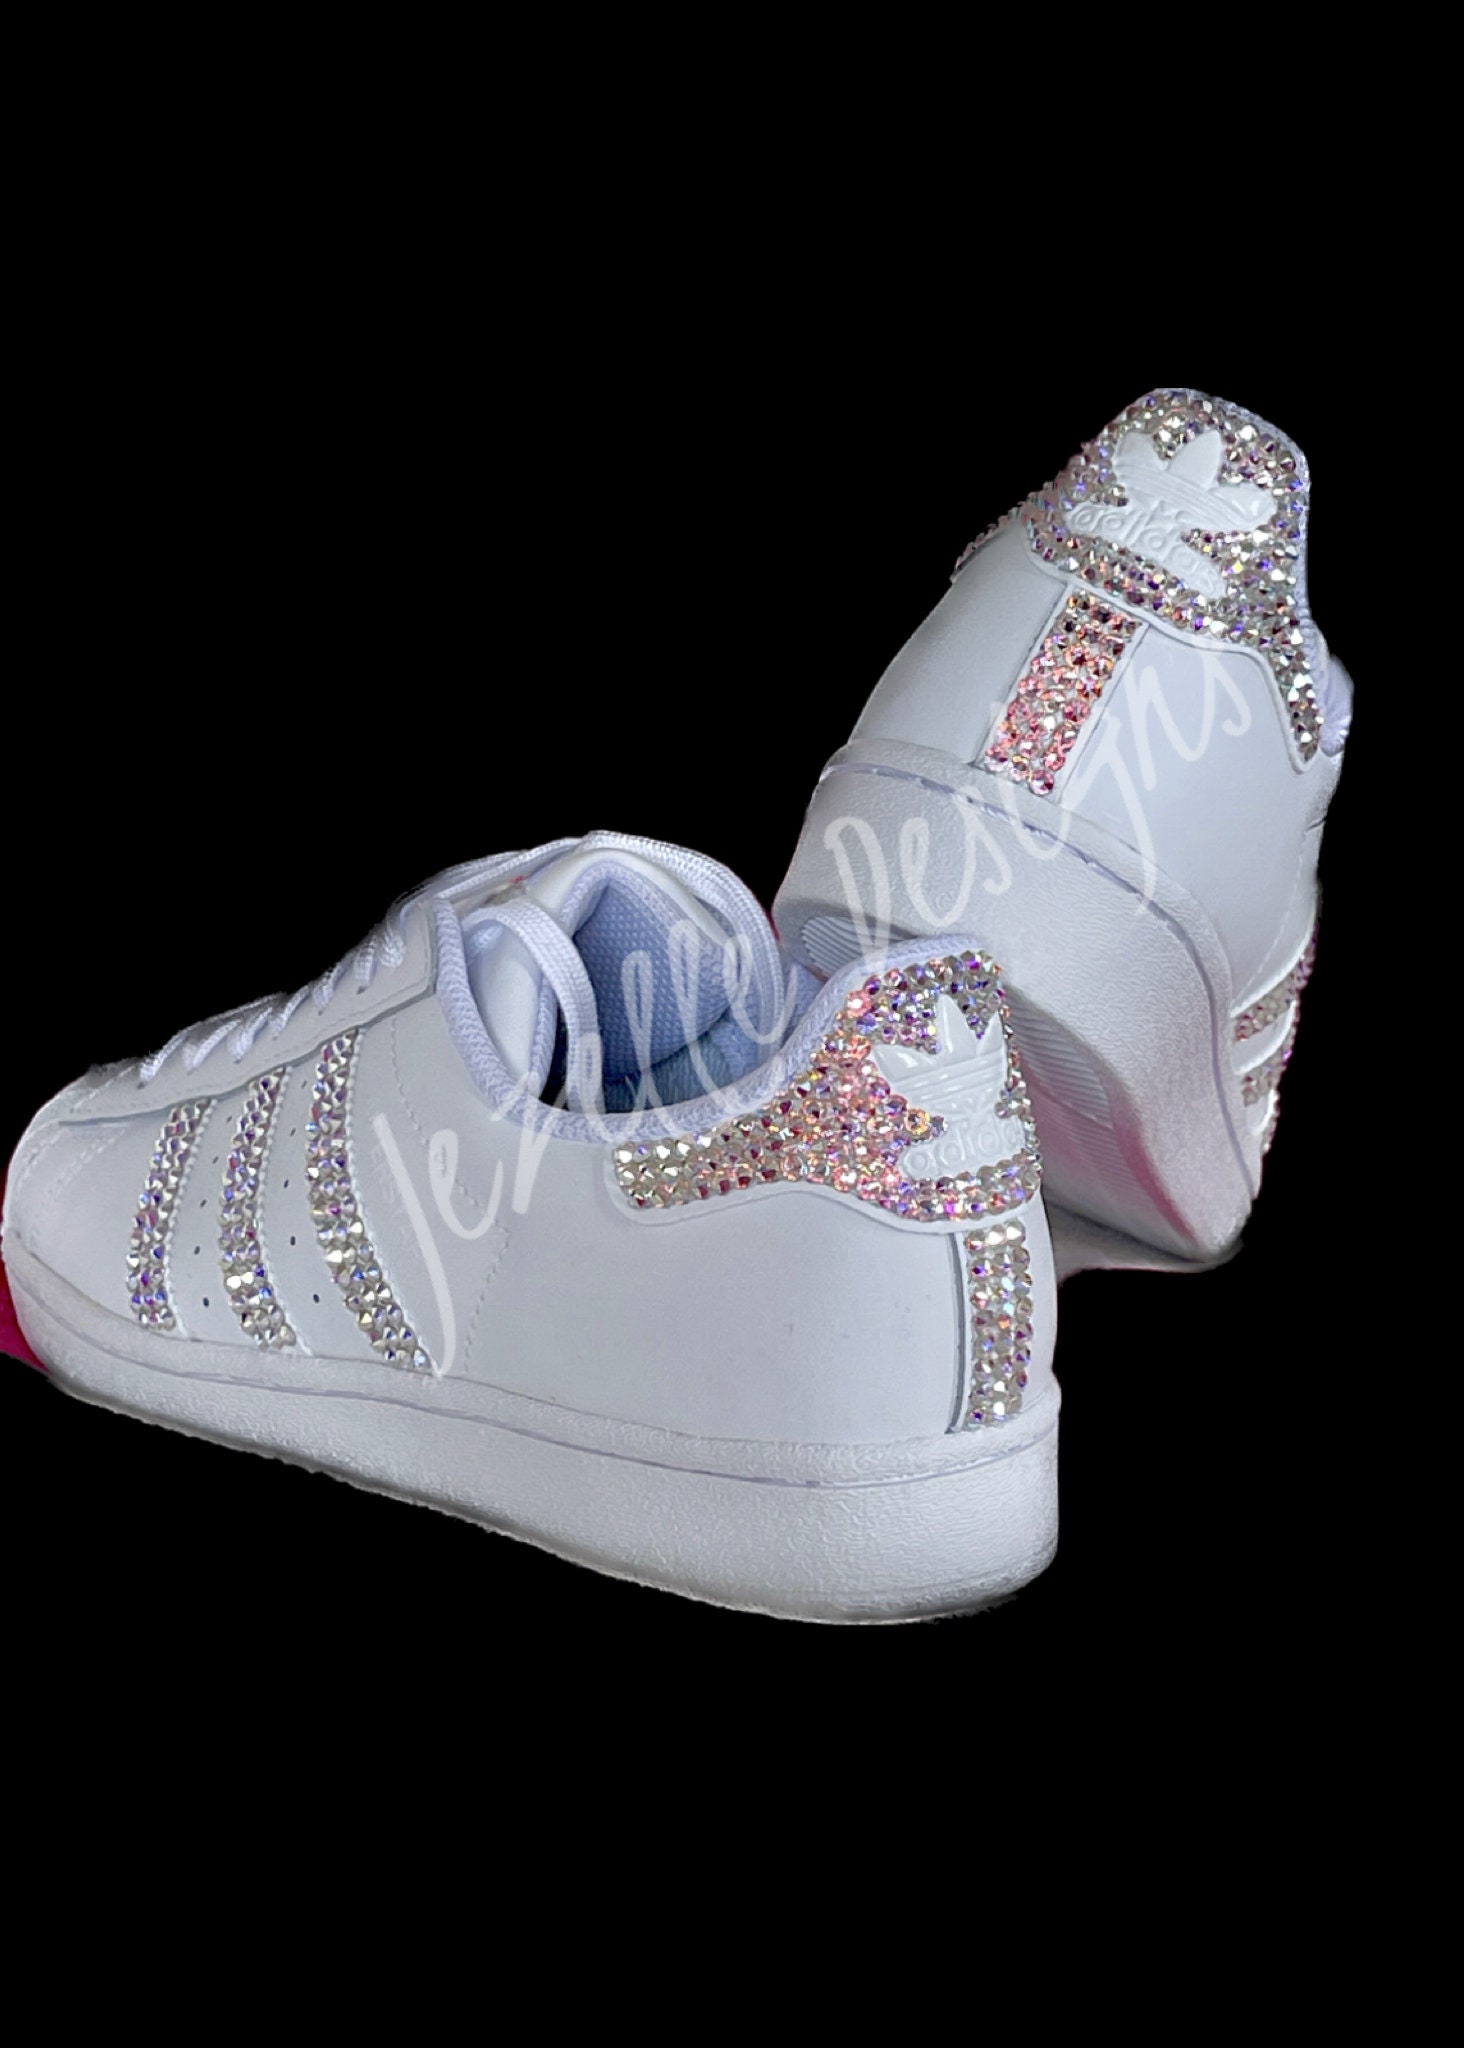 Superstar Bling Sneakers Adorned With Crystals - Etsy